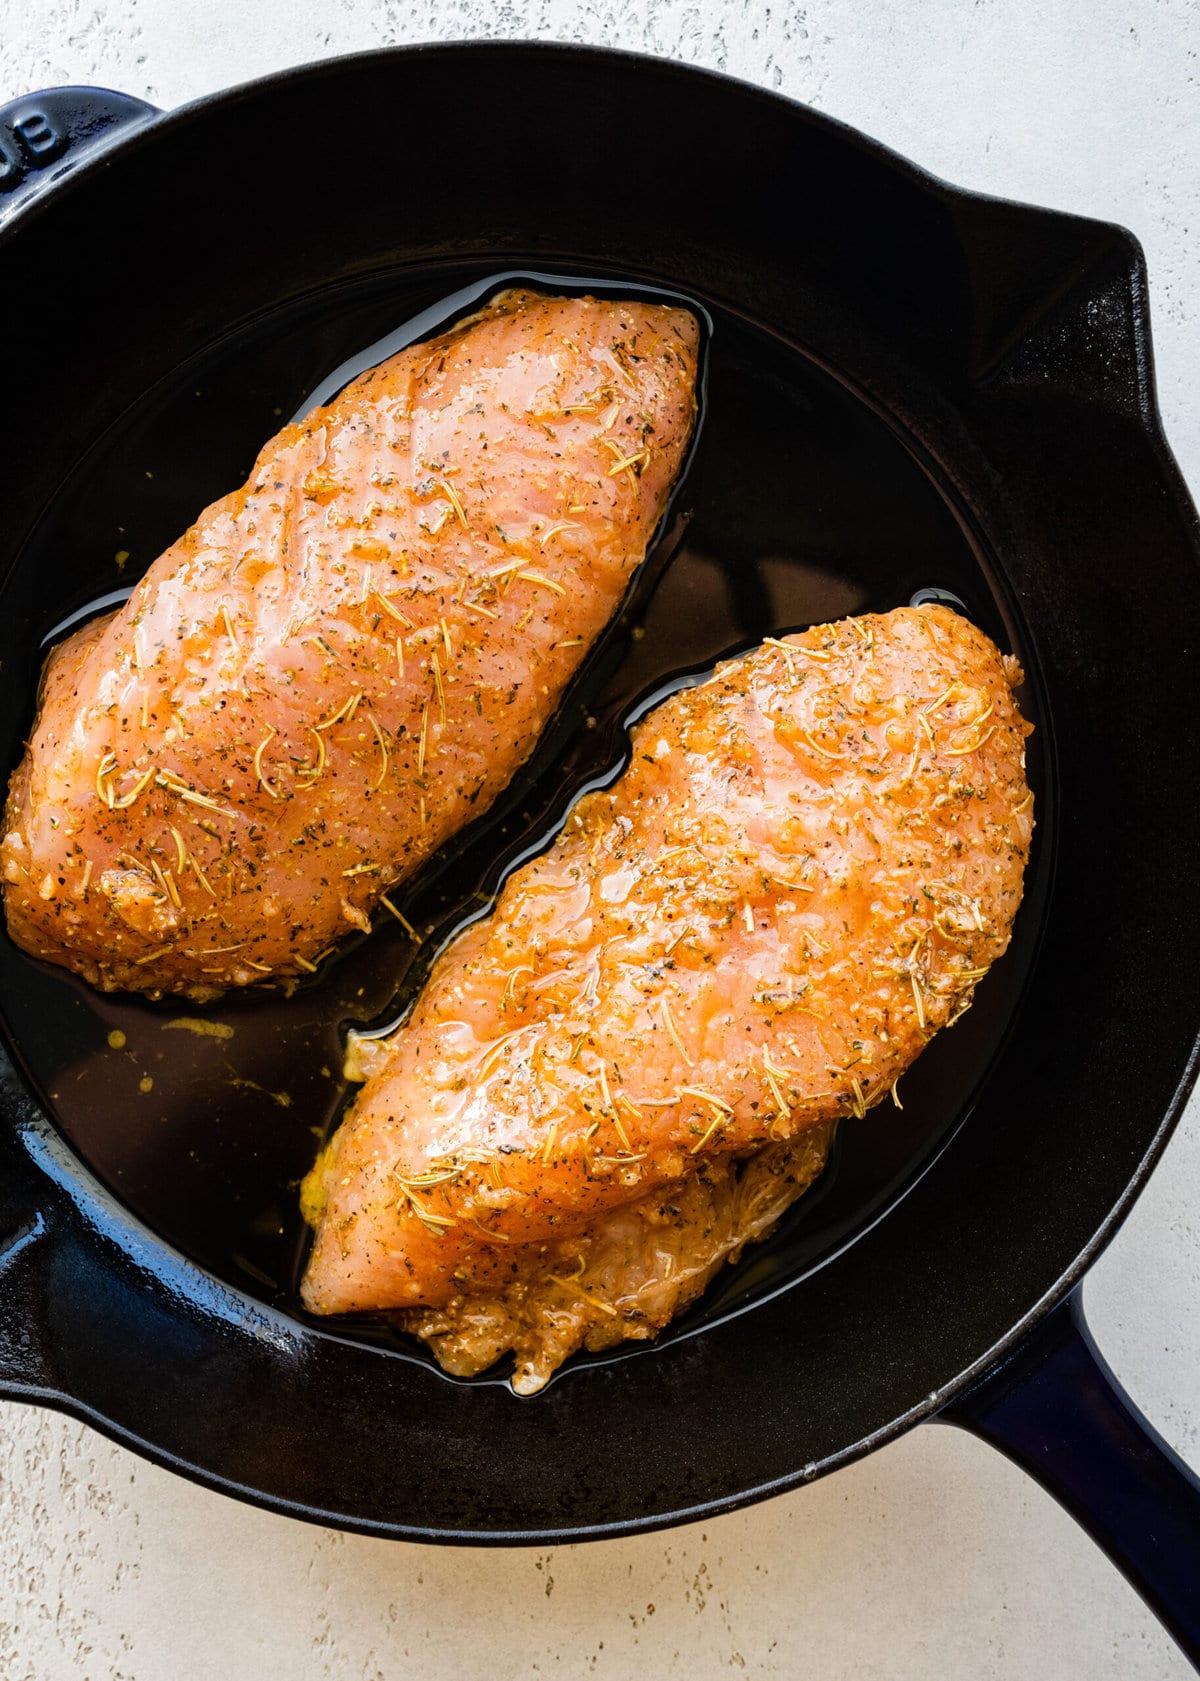 How to make Baked Turkey Tenderloin Step-by-Step: searing the tenderloin on both sides then baking in the oven.